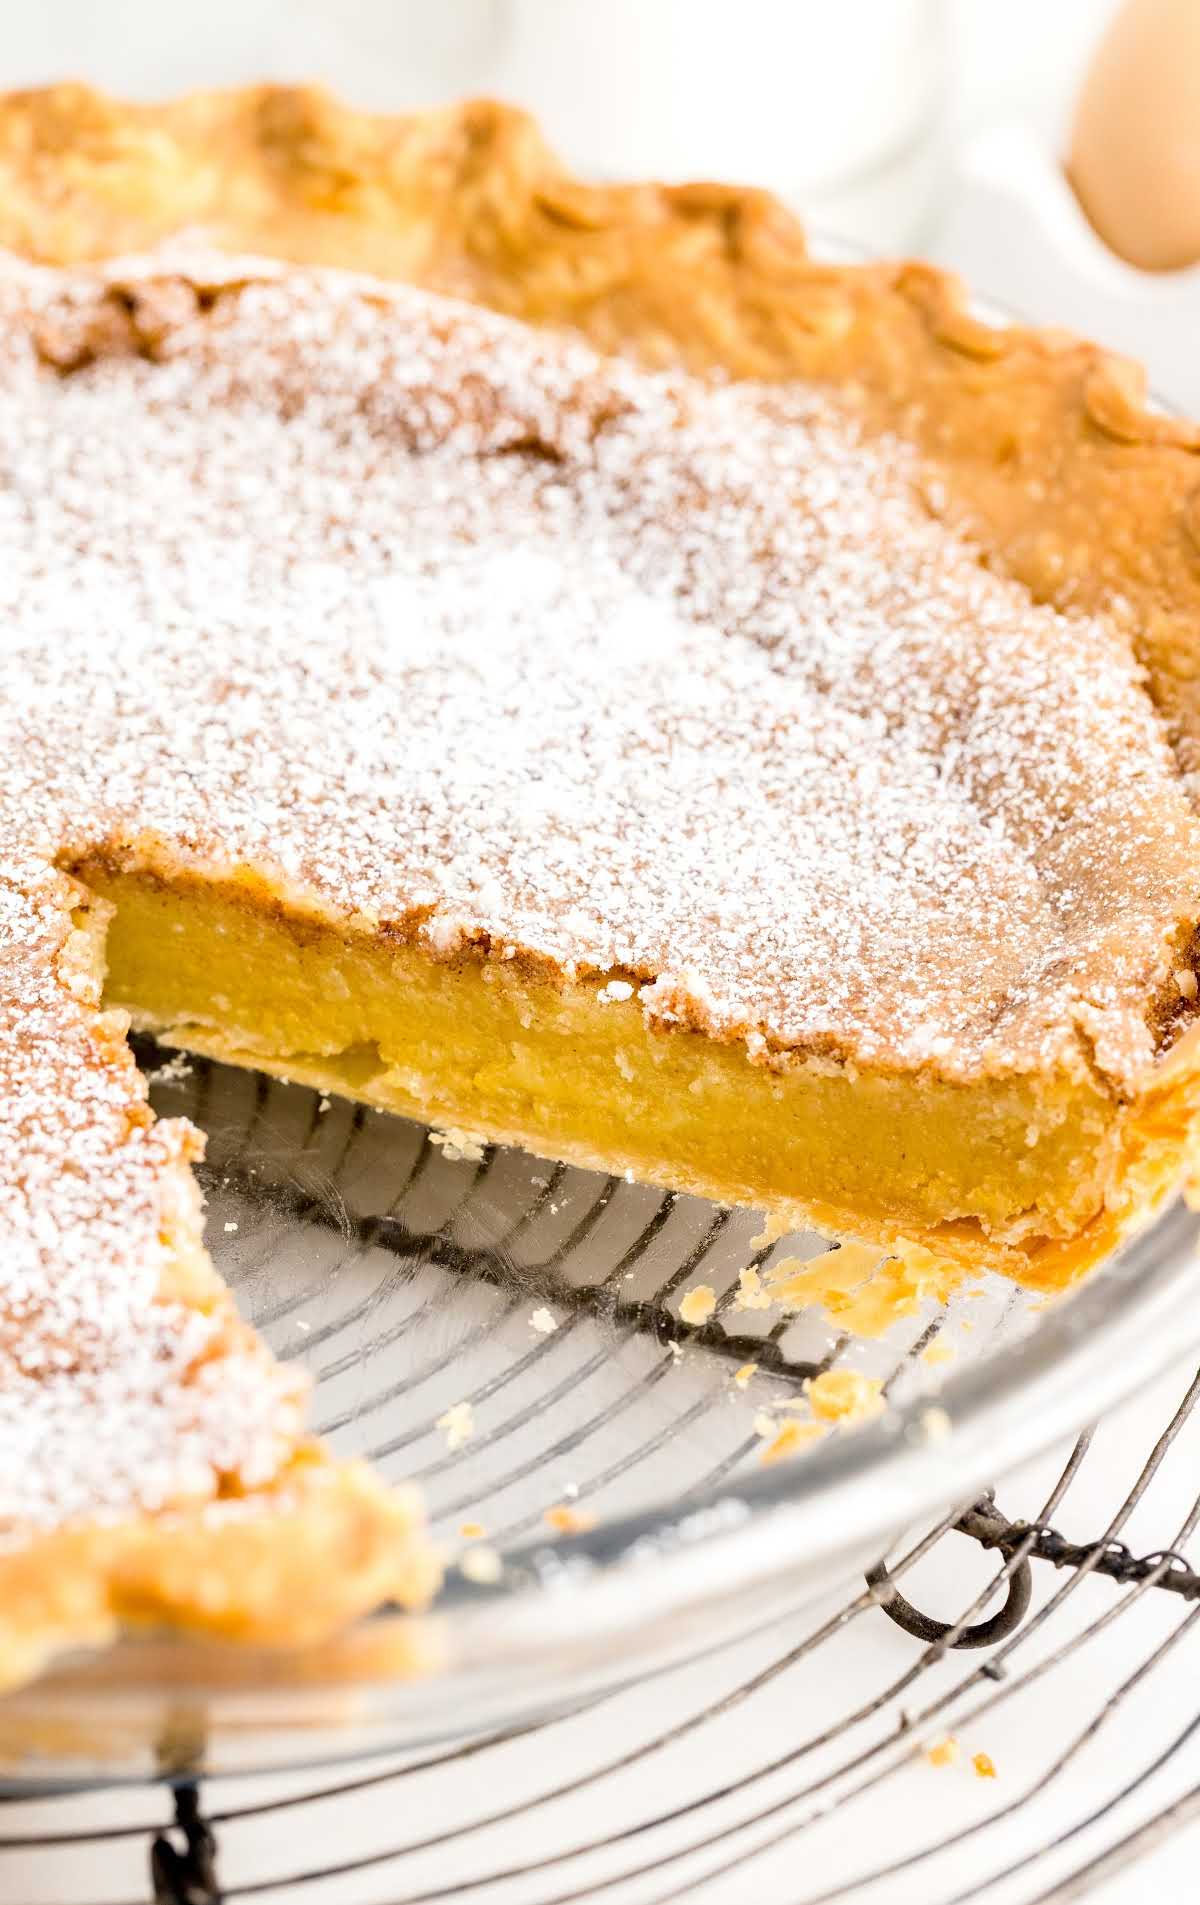 A piece of cake on a plate, with Chess pie and Custard